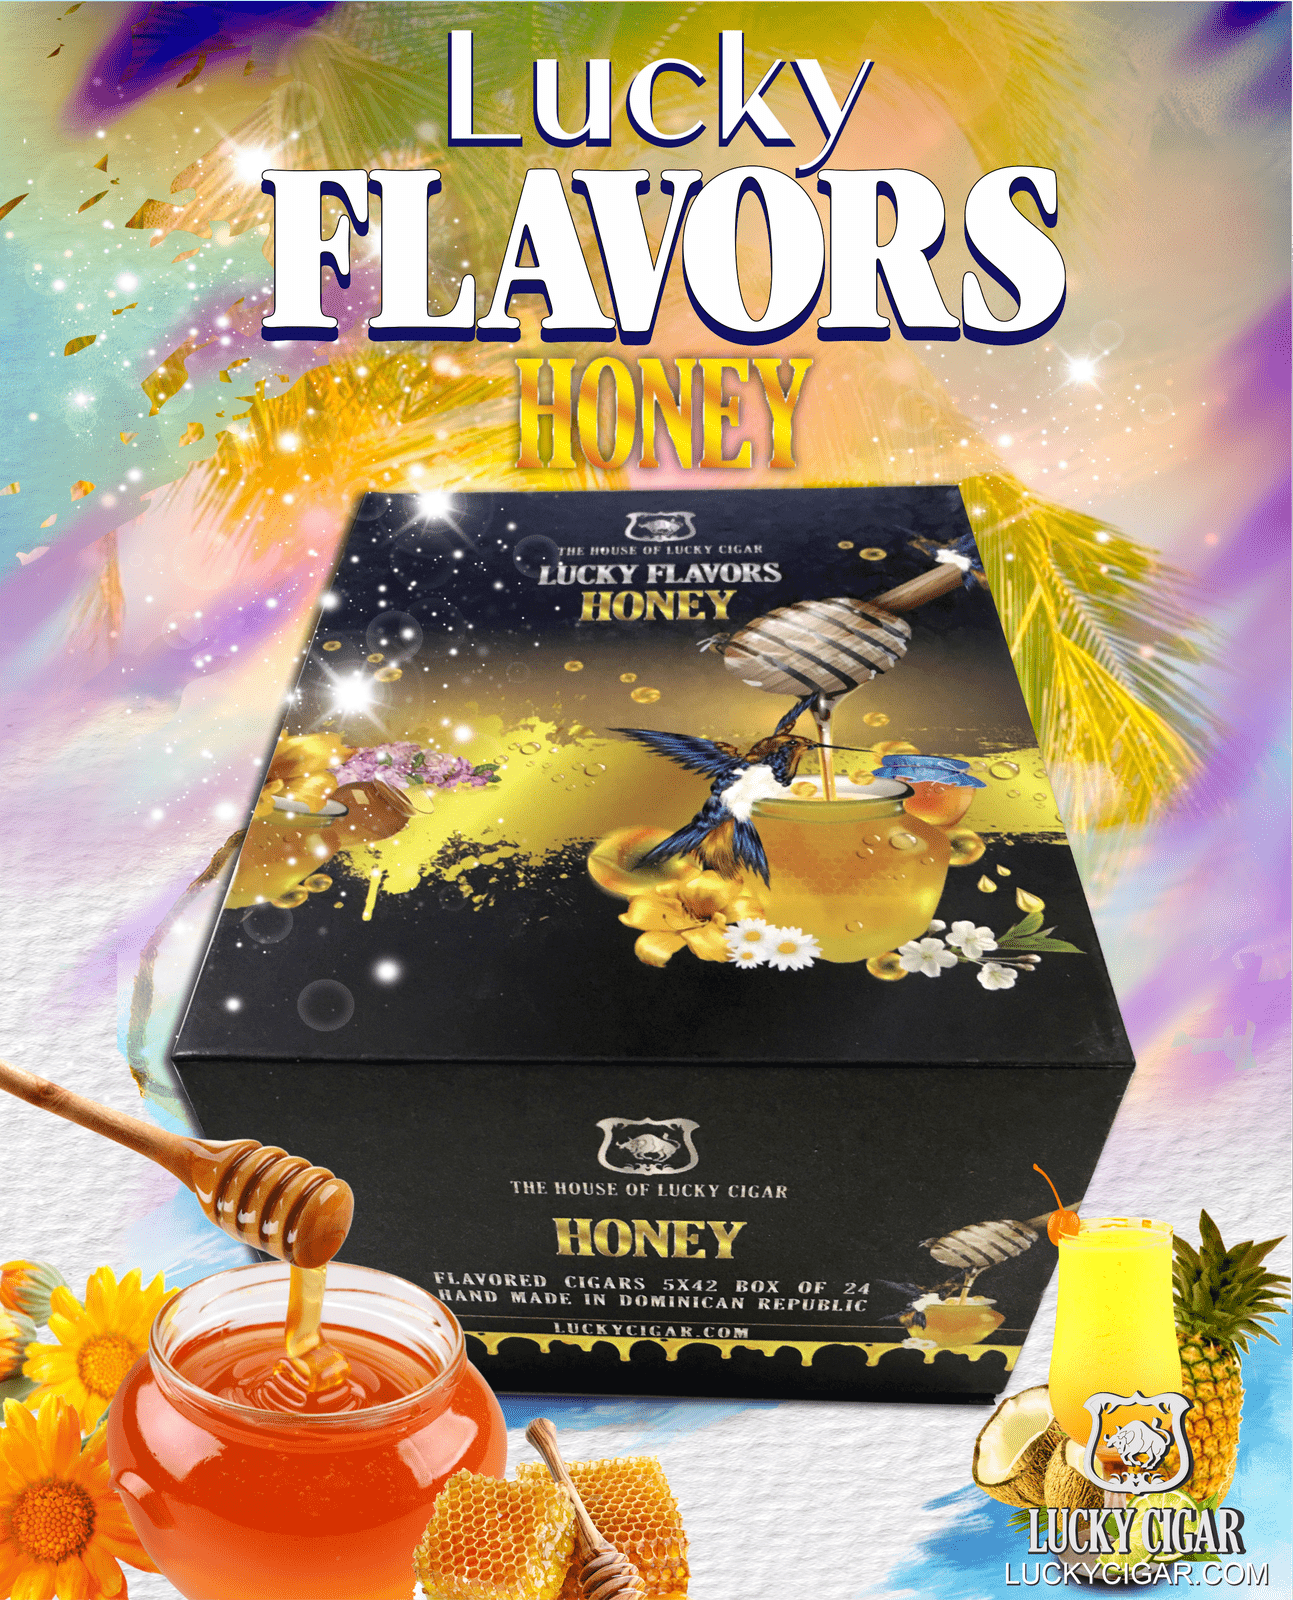 Flavored Cigars: Lucky Flavors Honey 5x42 Box of 24